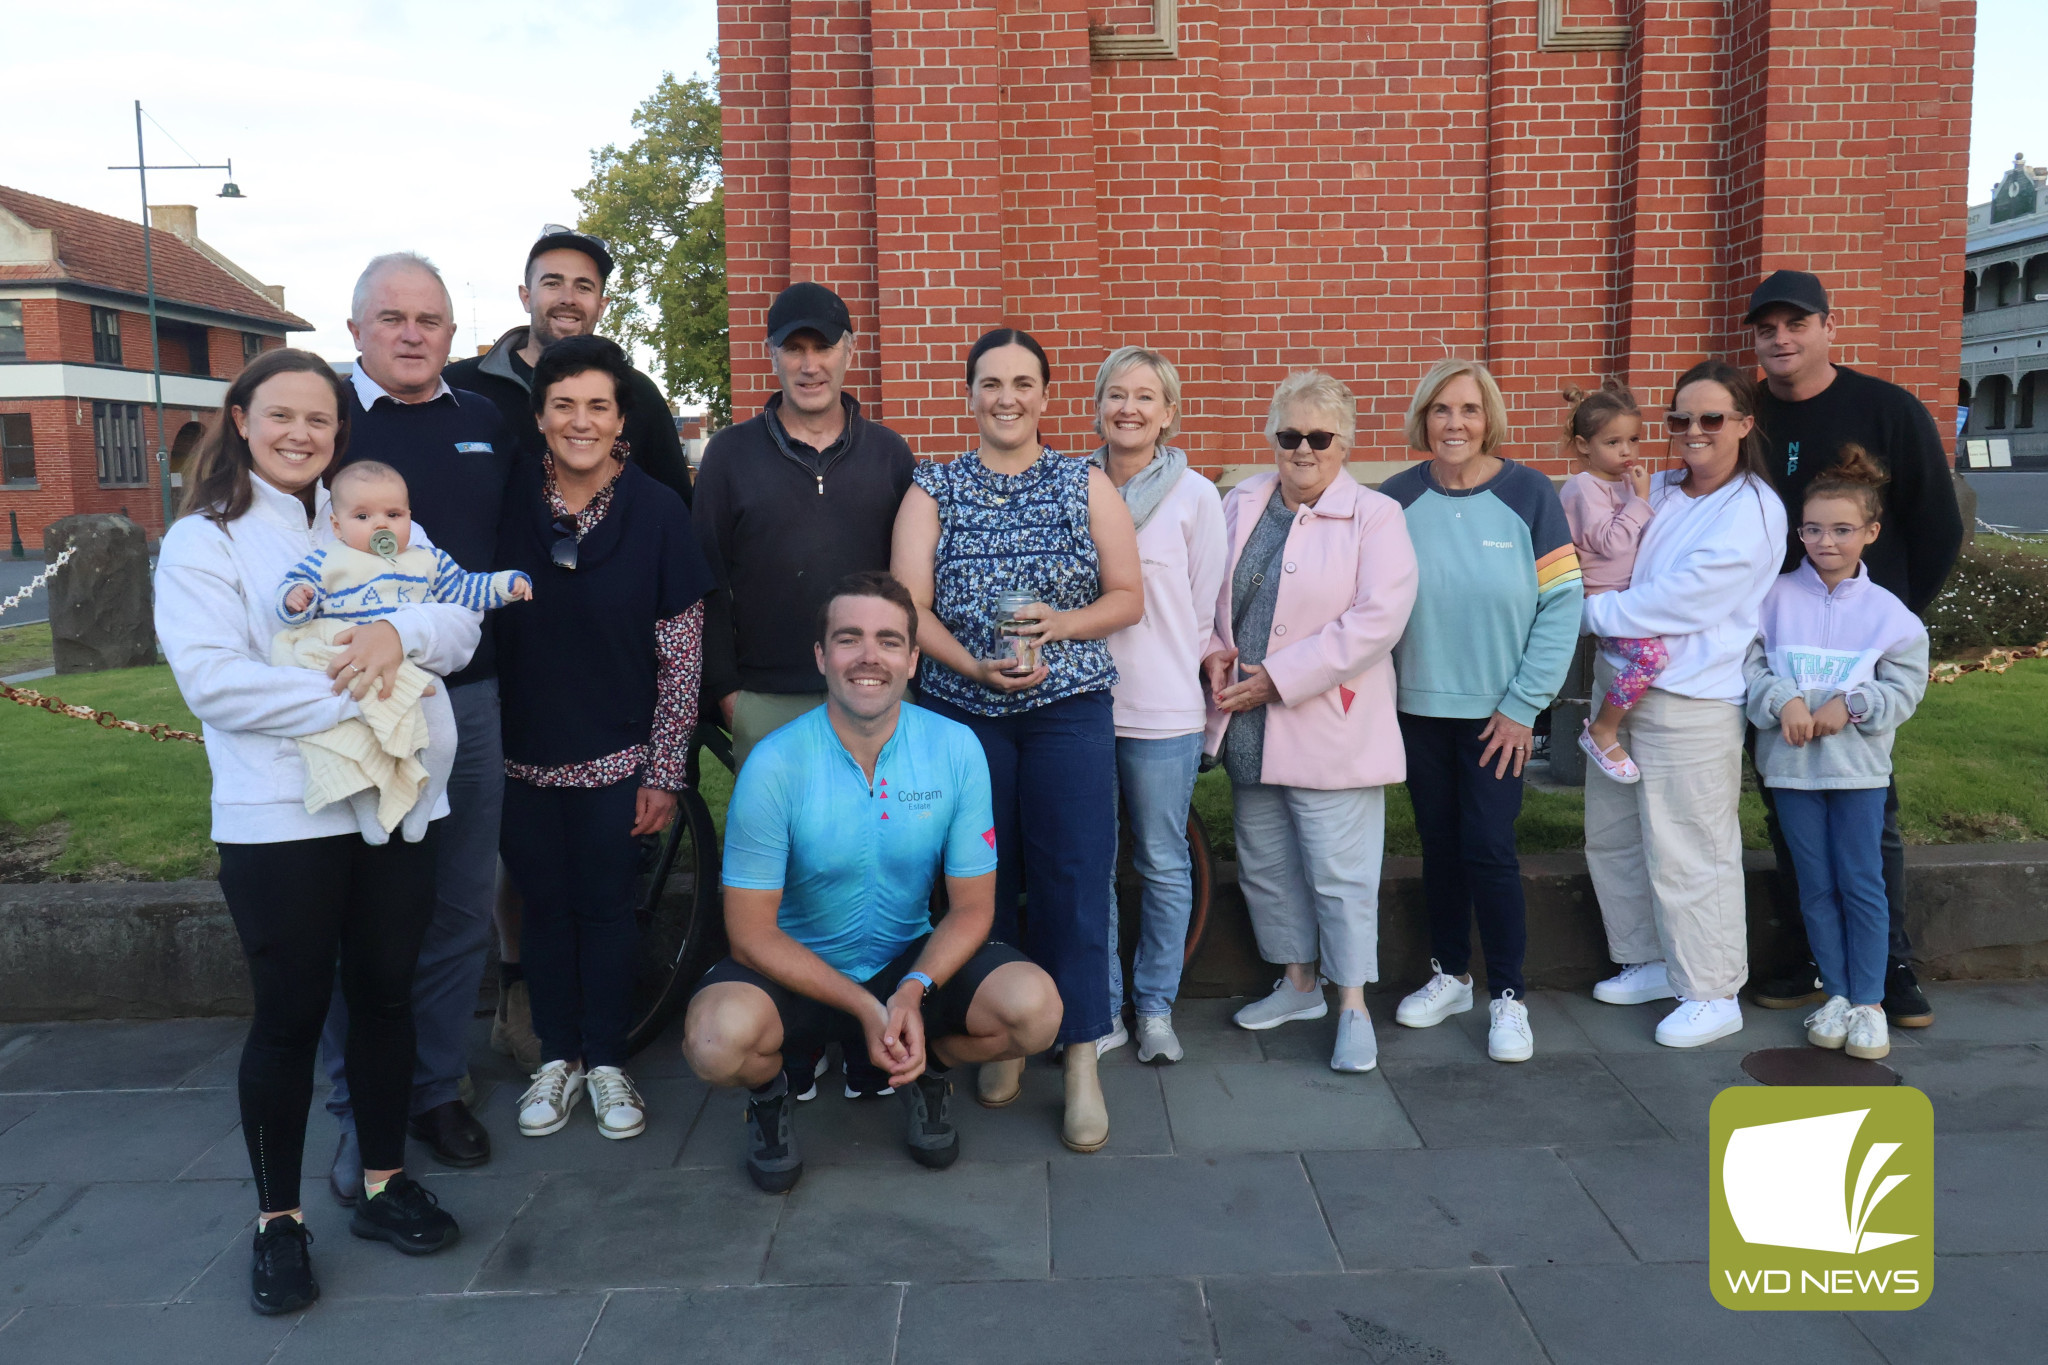 A proud family: The Rowbottoms were “incredibly proud” of Jake’s achievement, with the family joined by Camperdown residents as they marked the end of his ride.